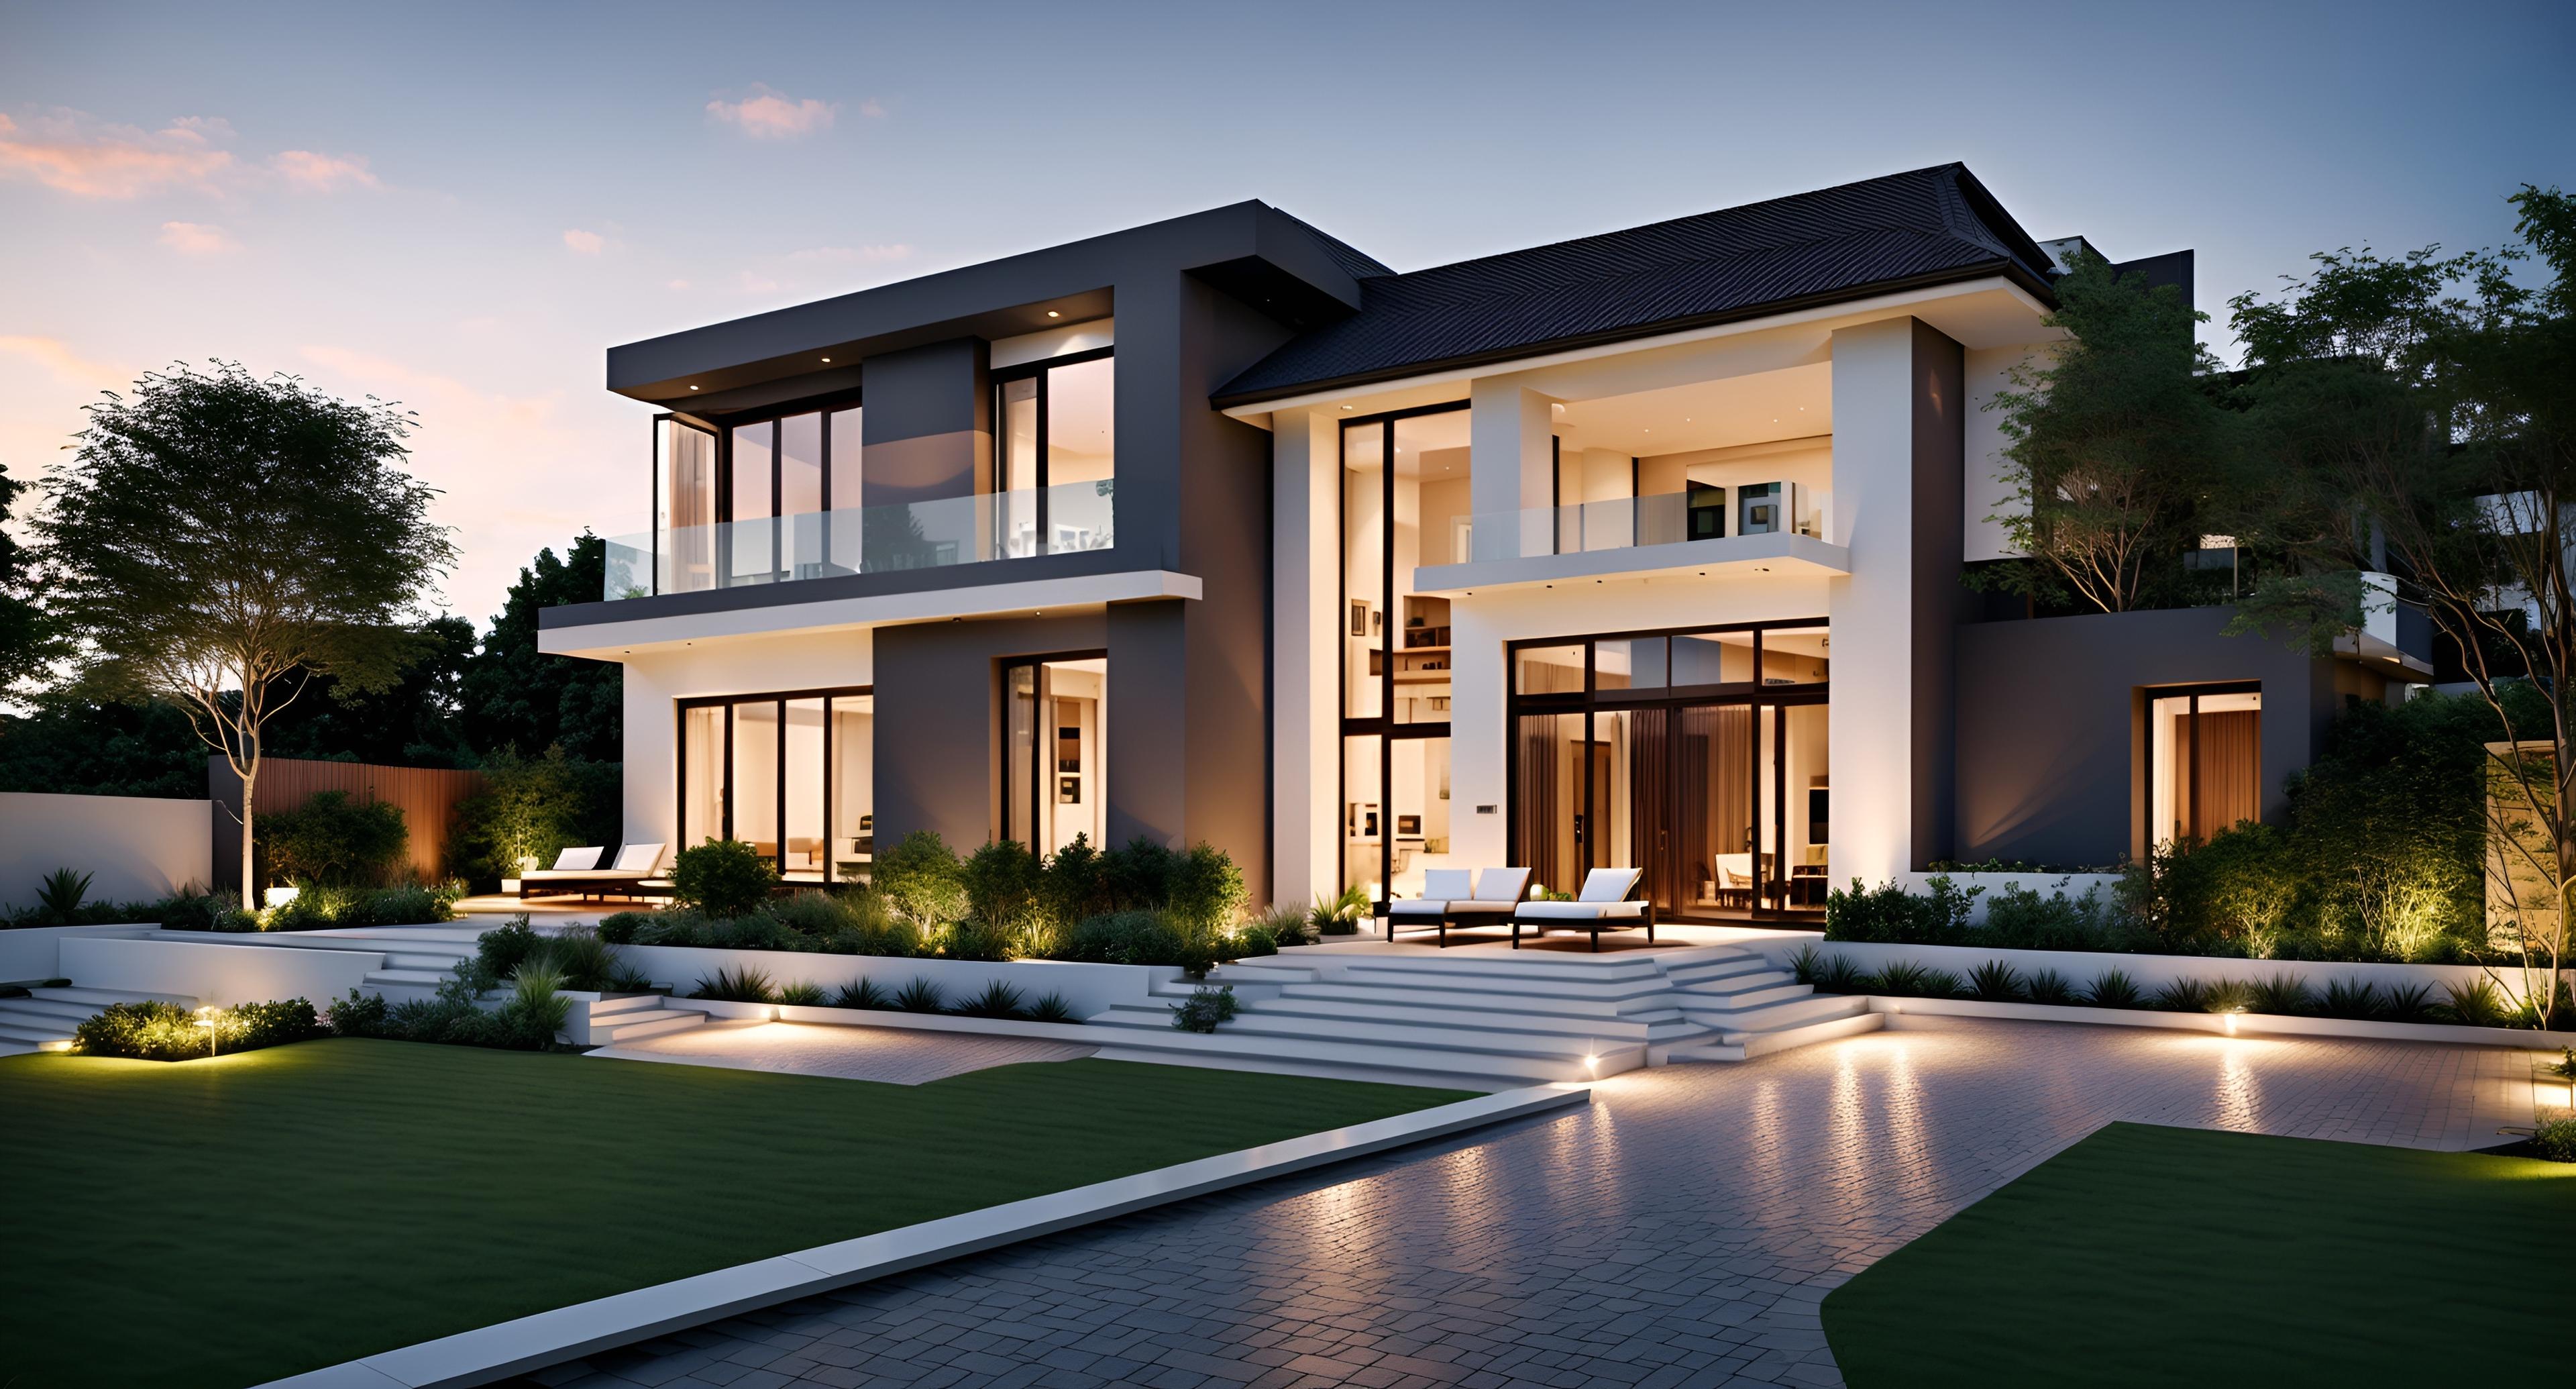 Knockdown rebuild proposed design of a double-storey modern home with exquisite features